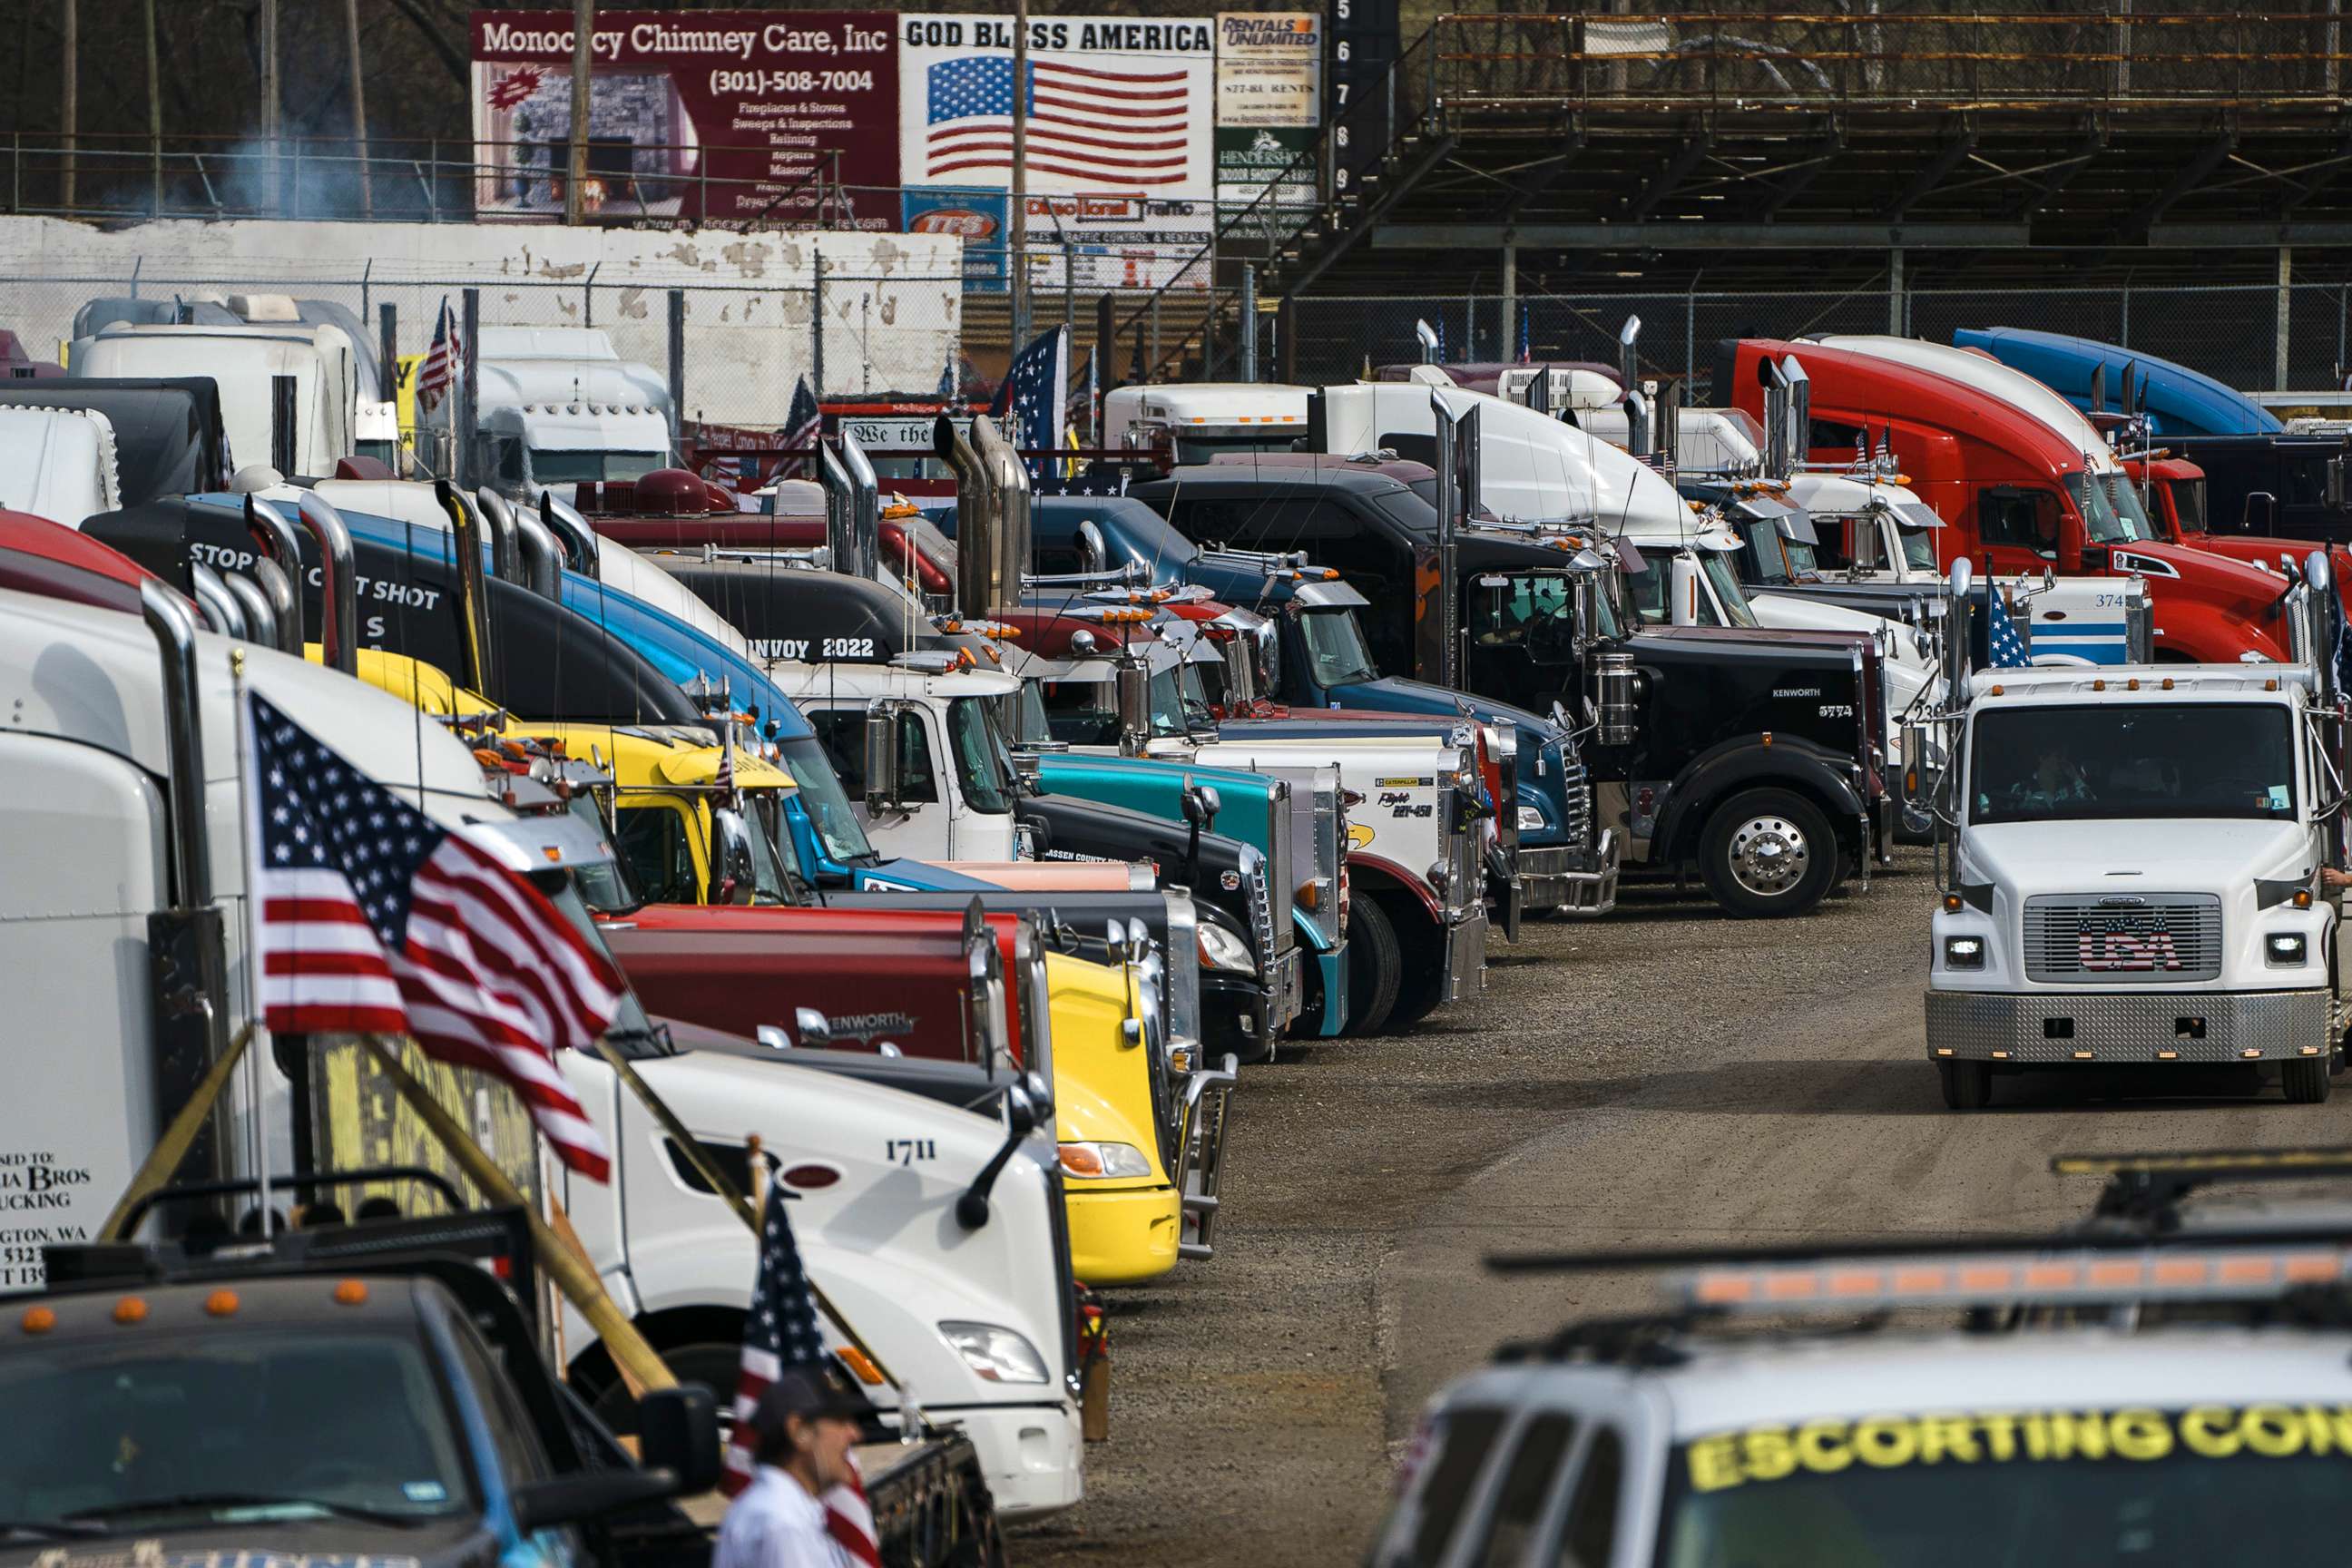 PHOTO: Members of the "People's Convoy" get ready to depart at the Hagerstown Speedway, March 7, 2022, in Hagerstown, Md.